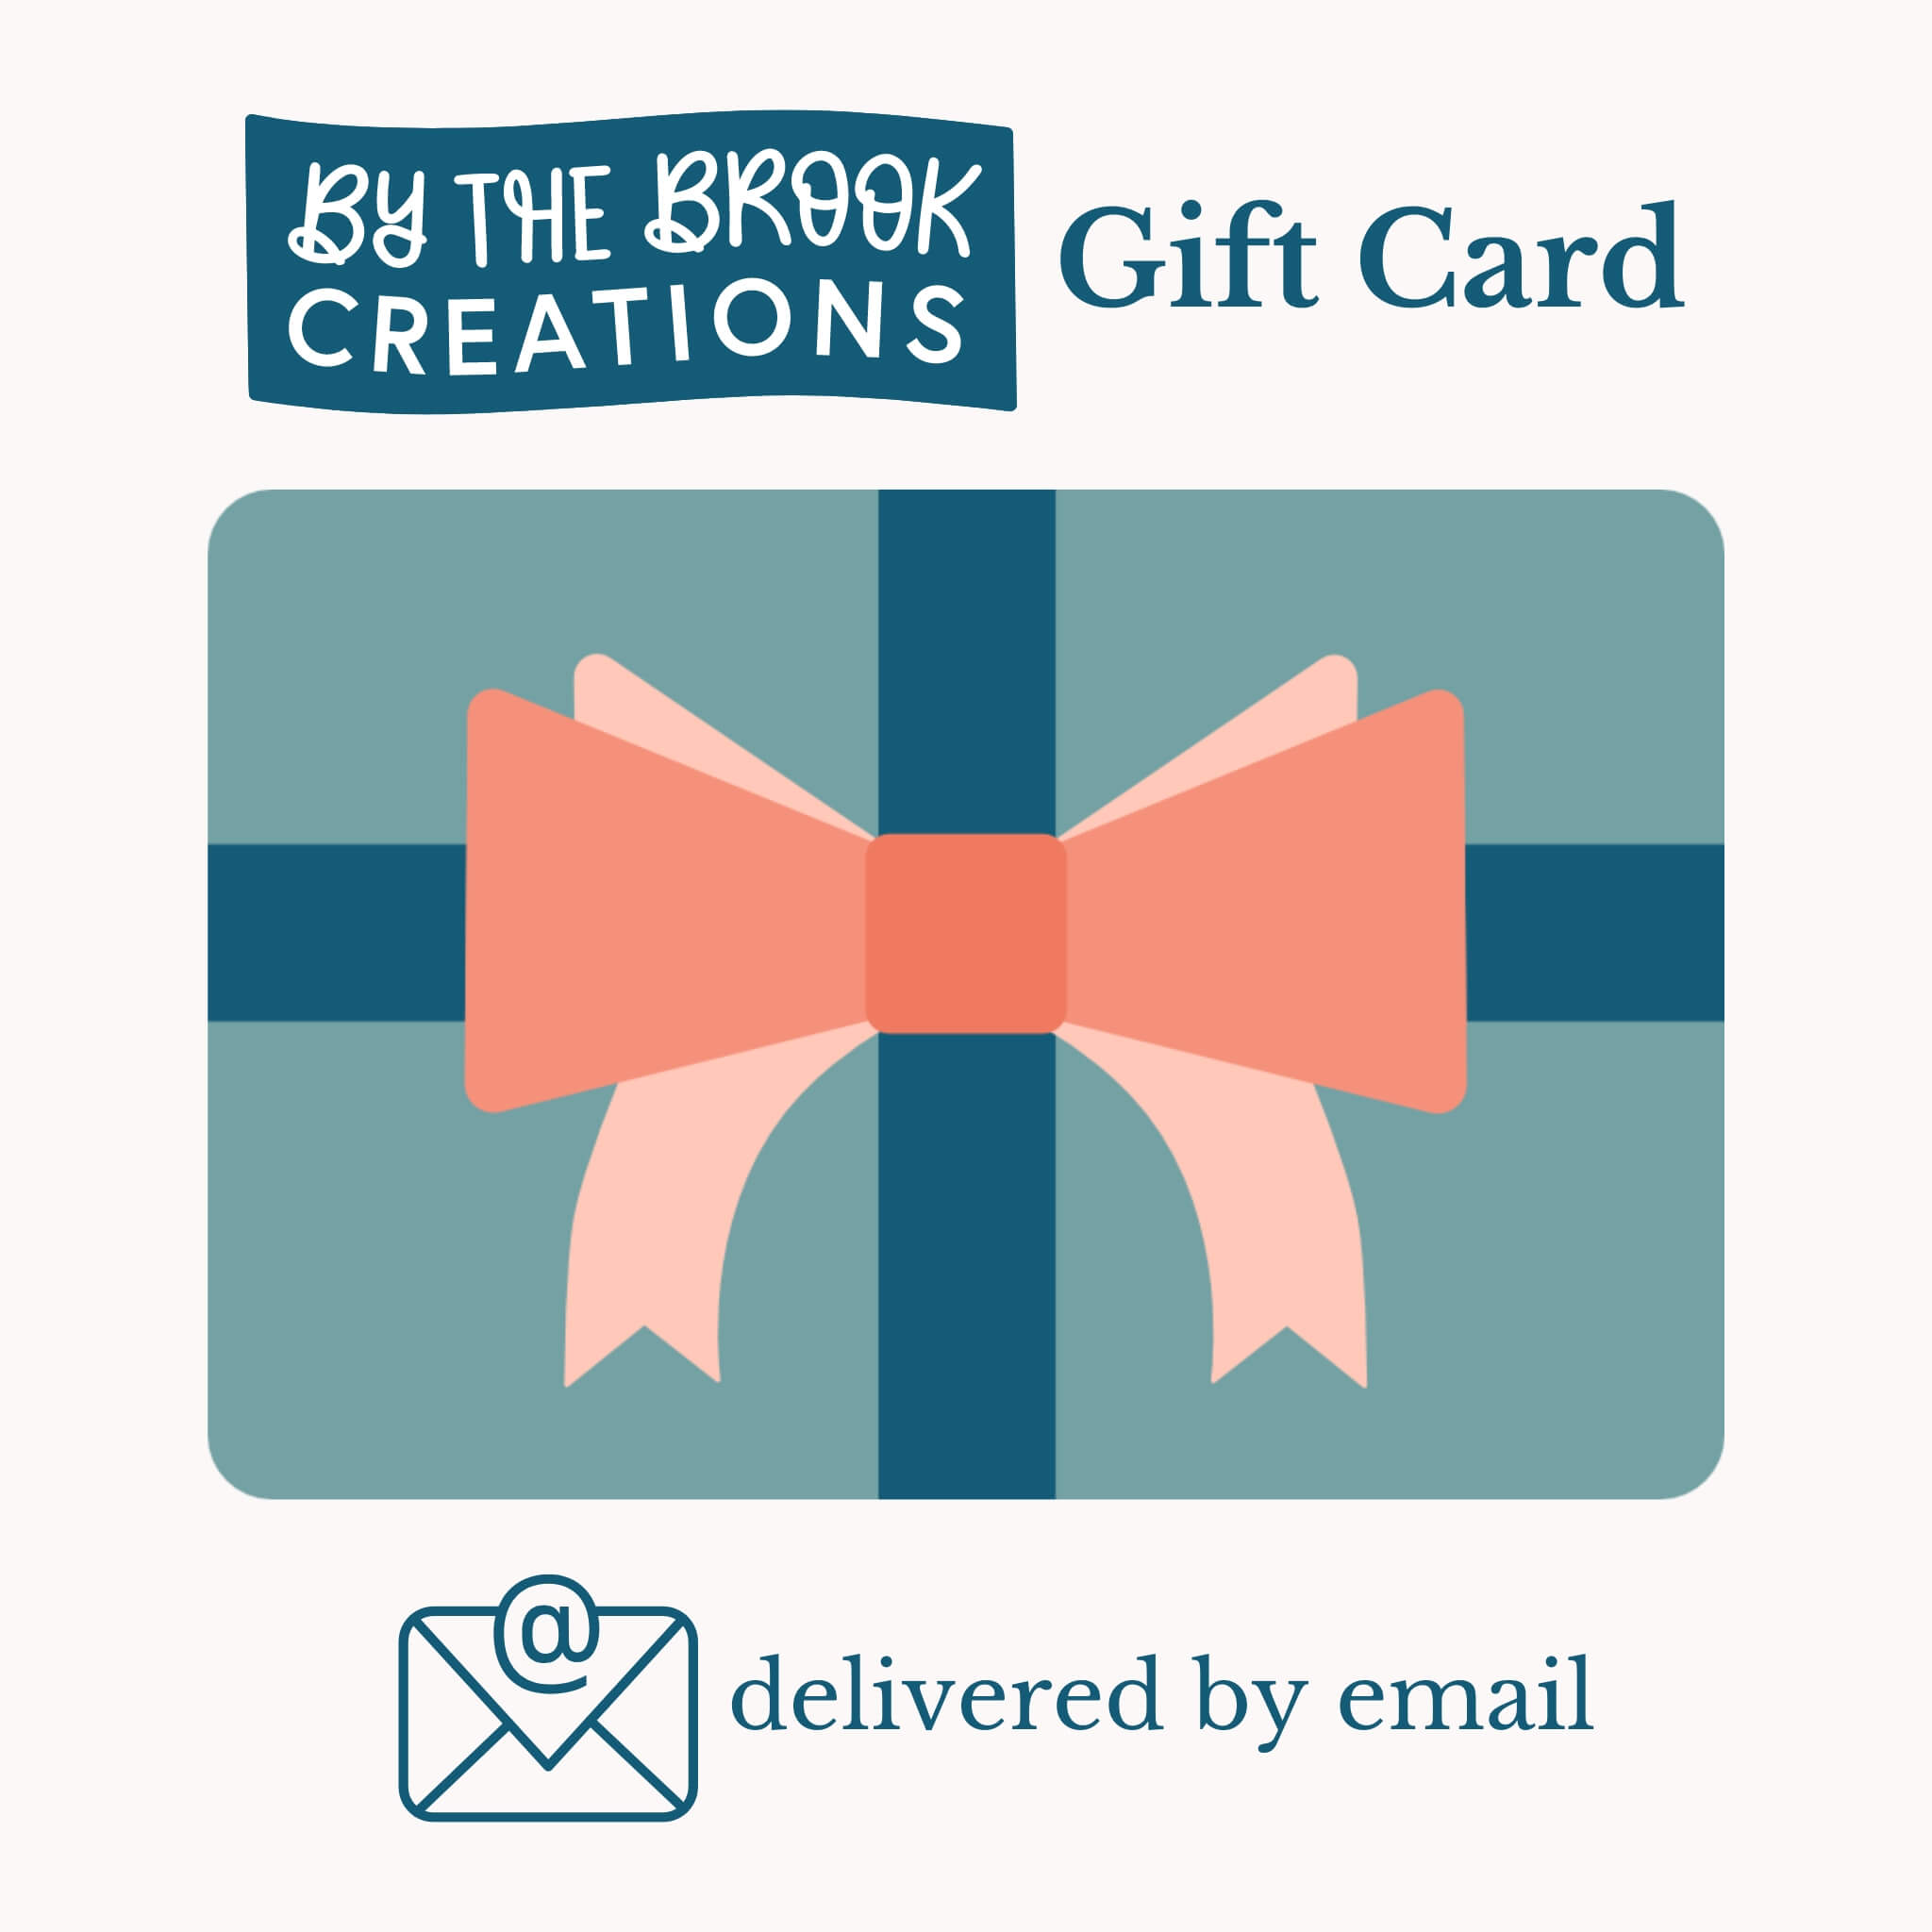 By the Brook Creations Gift Card - delivery by email